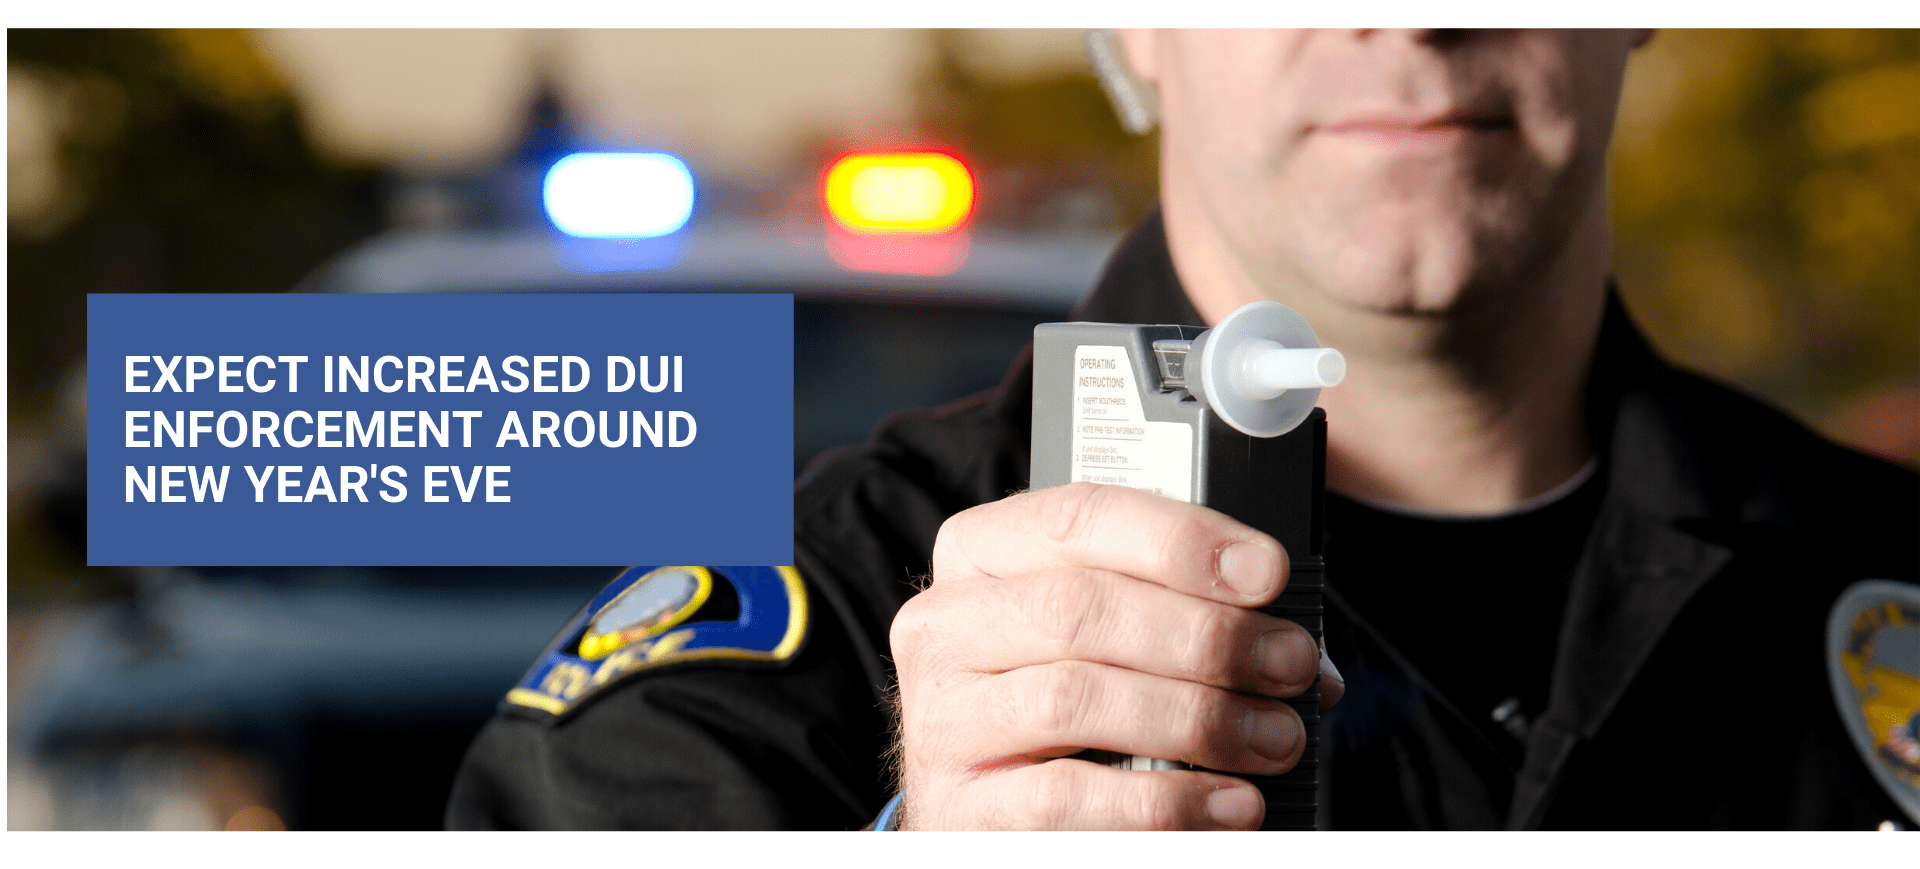 Expected Increase DUI Enforcement around New Year’s Eve